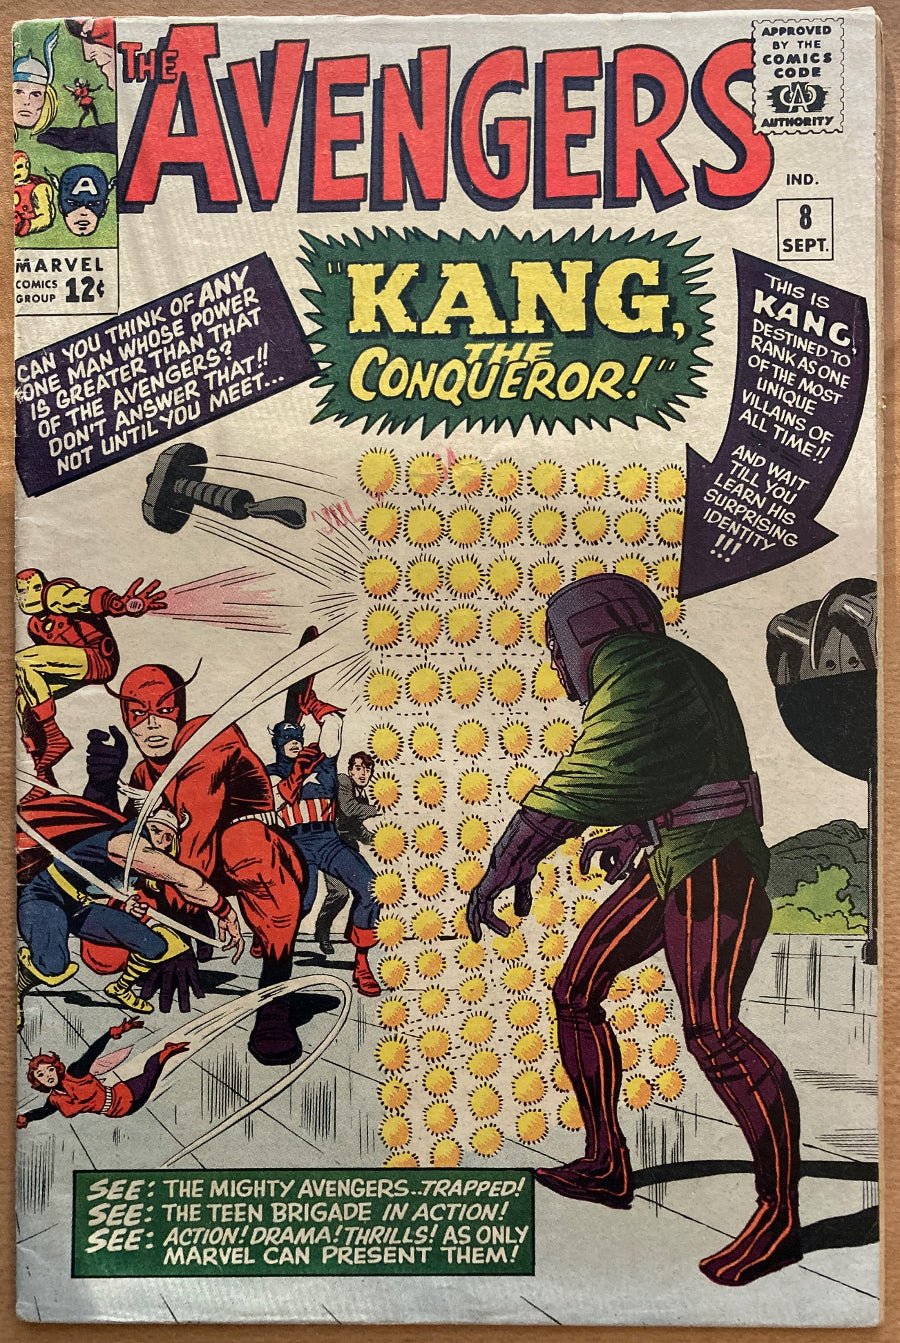 Avengers #8 1st Appearance of Kang the Conqueror